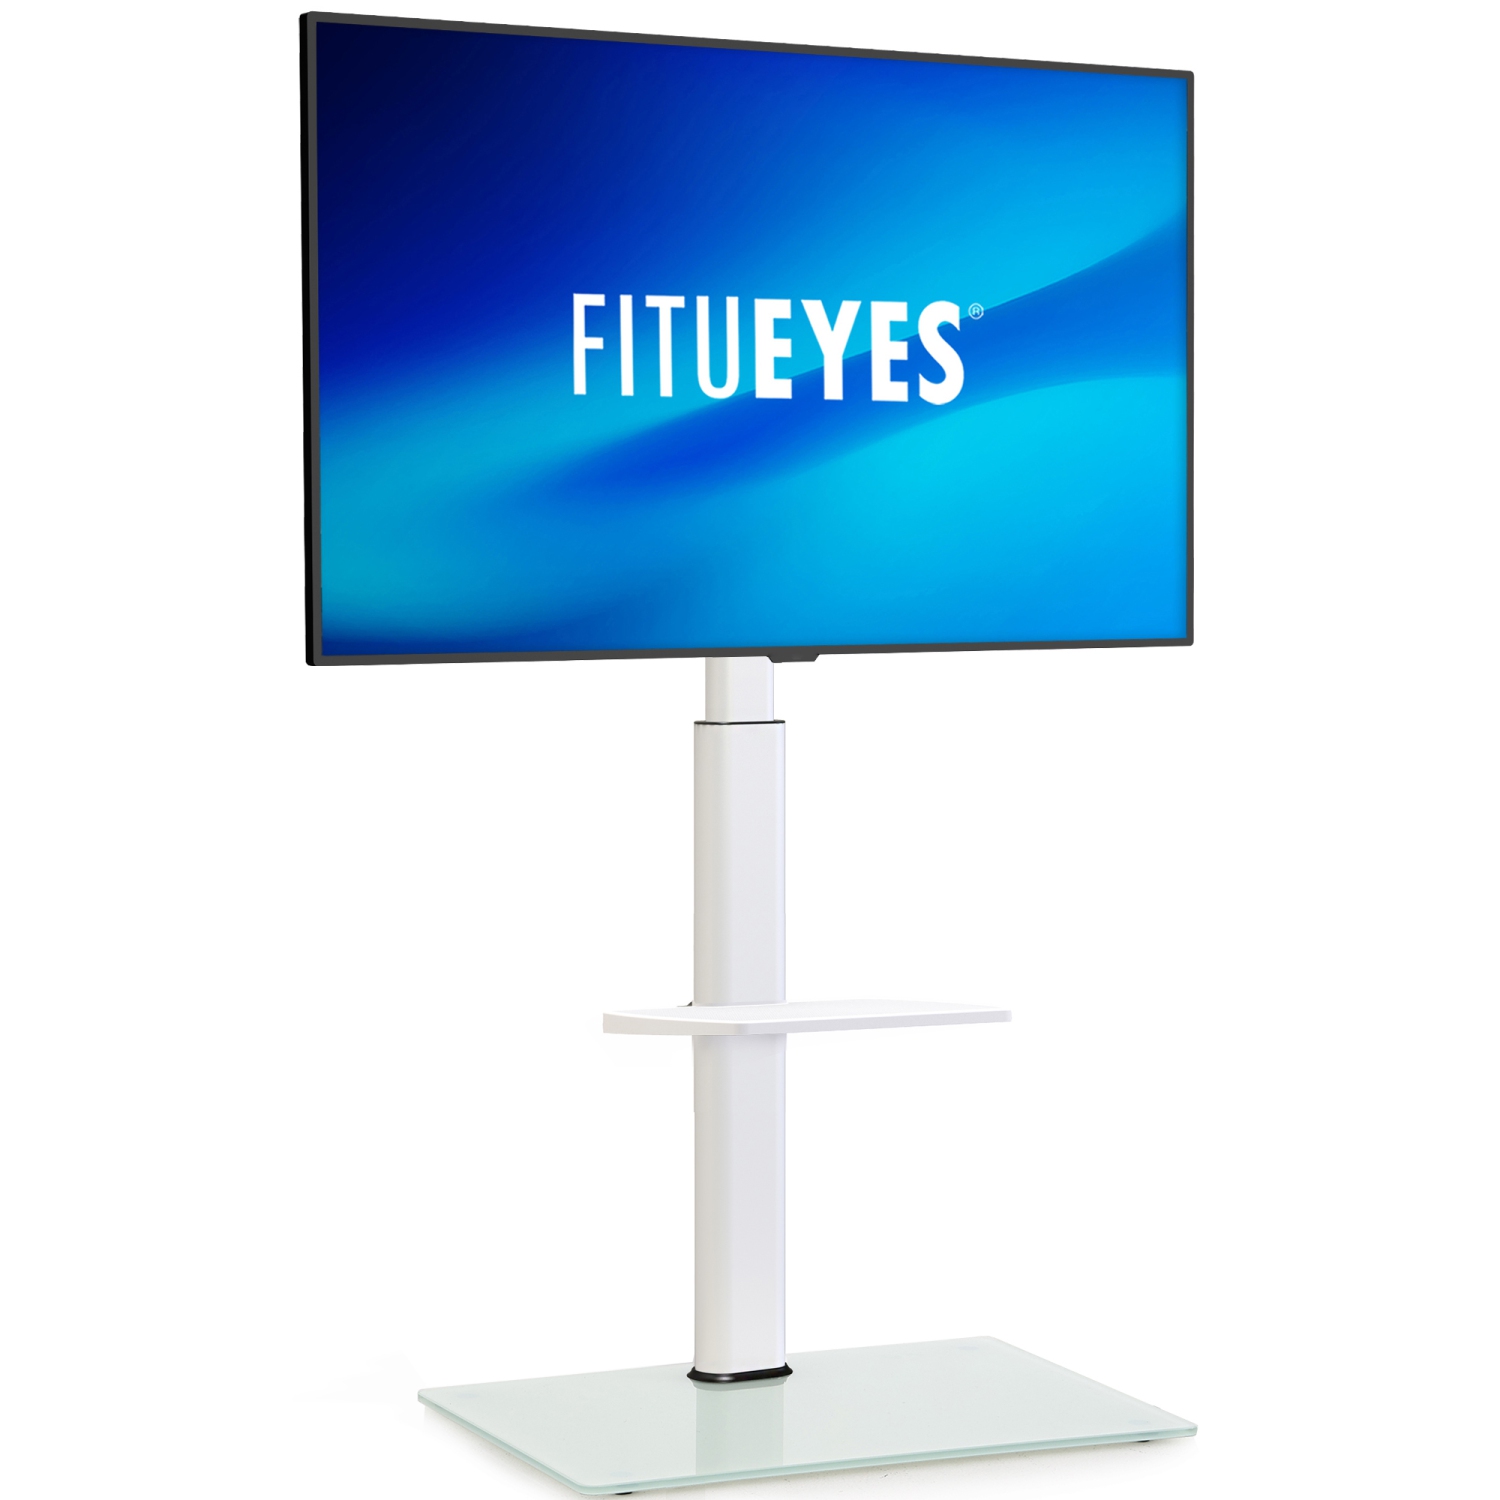 FITUEYES White TV Stand Mount for 32-60 inch TV Screen, 2 Tier Floor TV Stand with Swivel 70 Degree and Height Adjustable Max VESA 600x400 mm